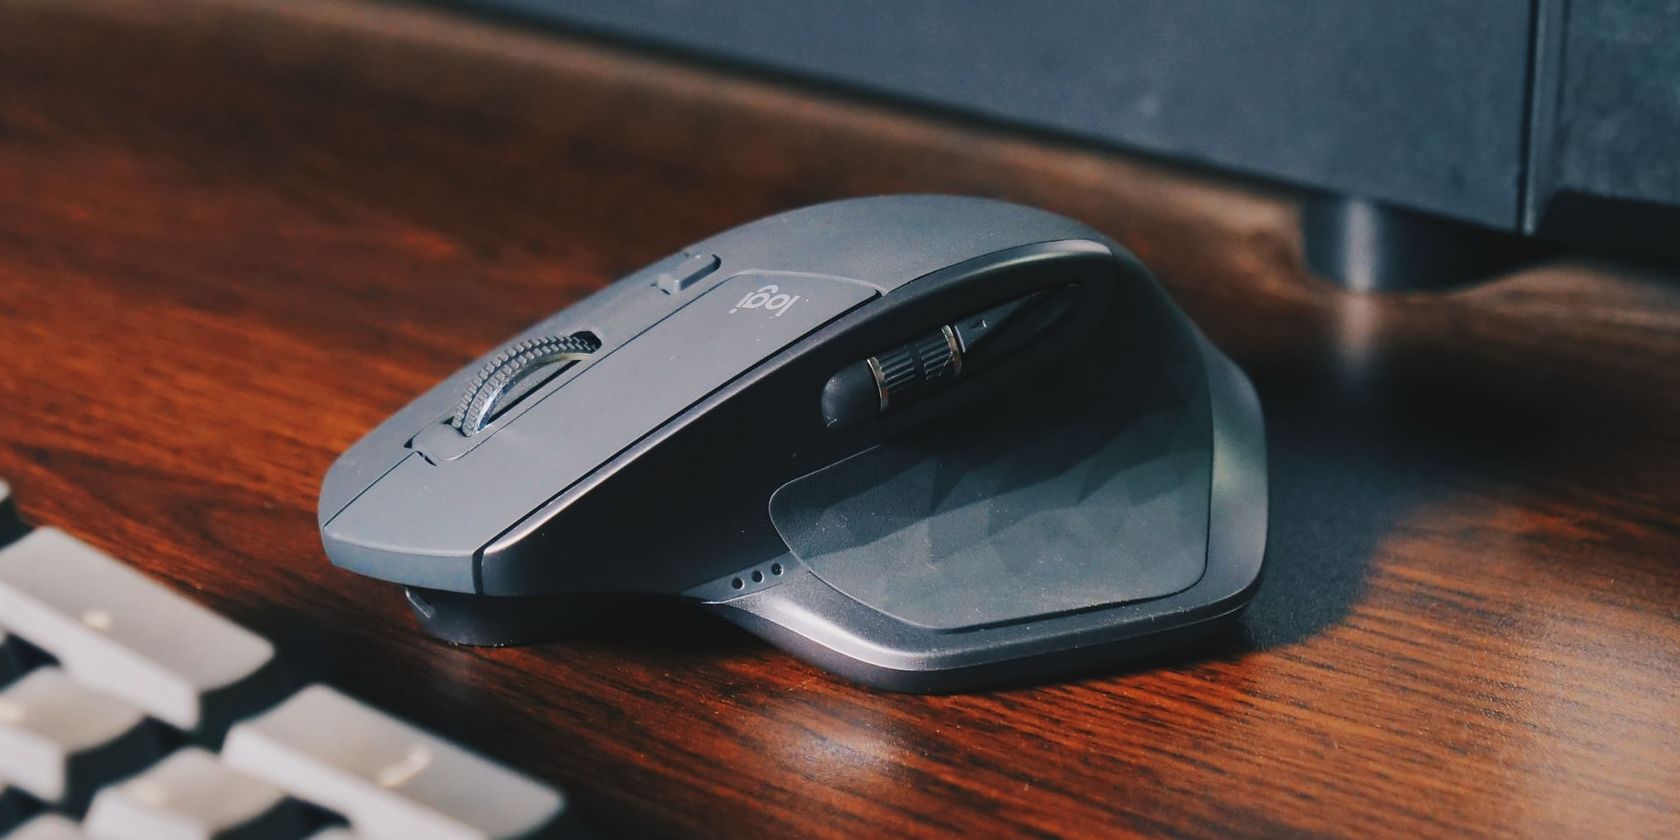 5 Reasons Why Logitech’s MX Master Mice Are Worth the Money